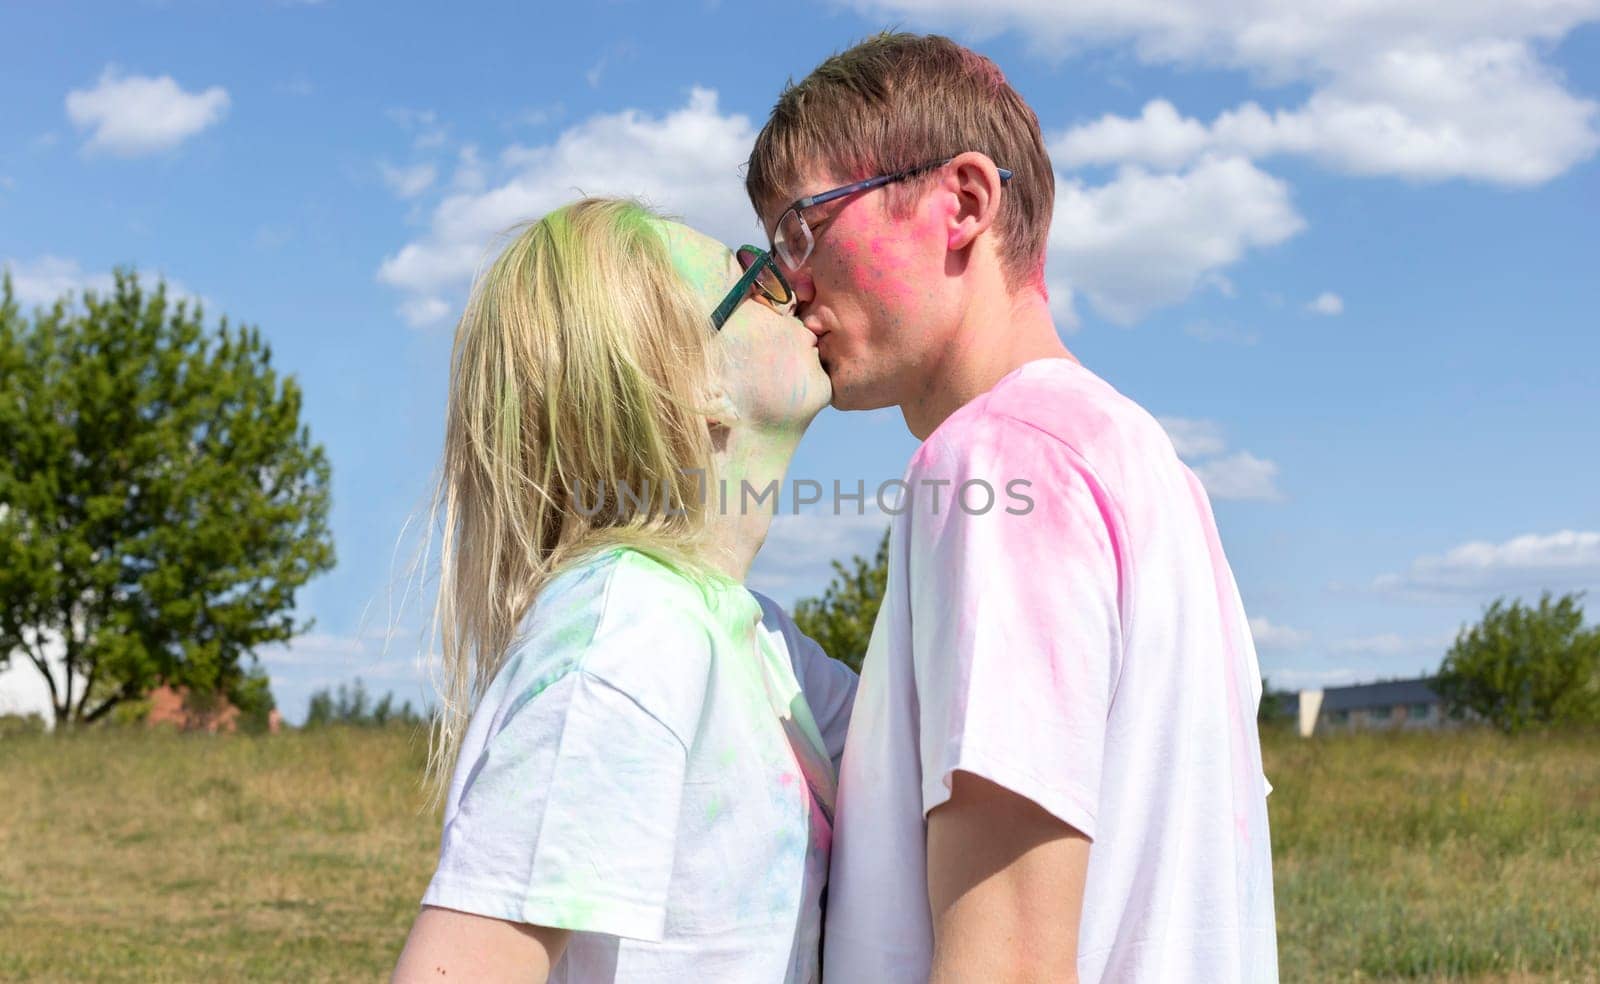 Romantic Caucasian Couple Adults Kiss With Colorful Paint, Powder On Clothes On Holi Color Festival. Emotional Happy Man and Woman. Blue Sky, Green Trees On Background, Sunny Day. Horizontal Plane by netatsi